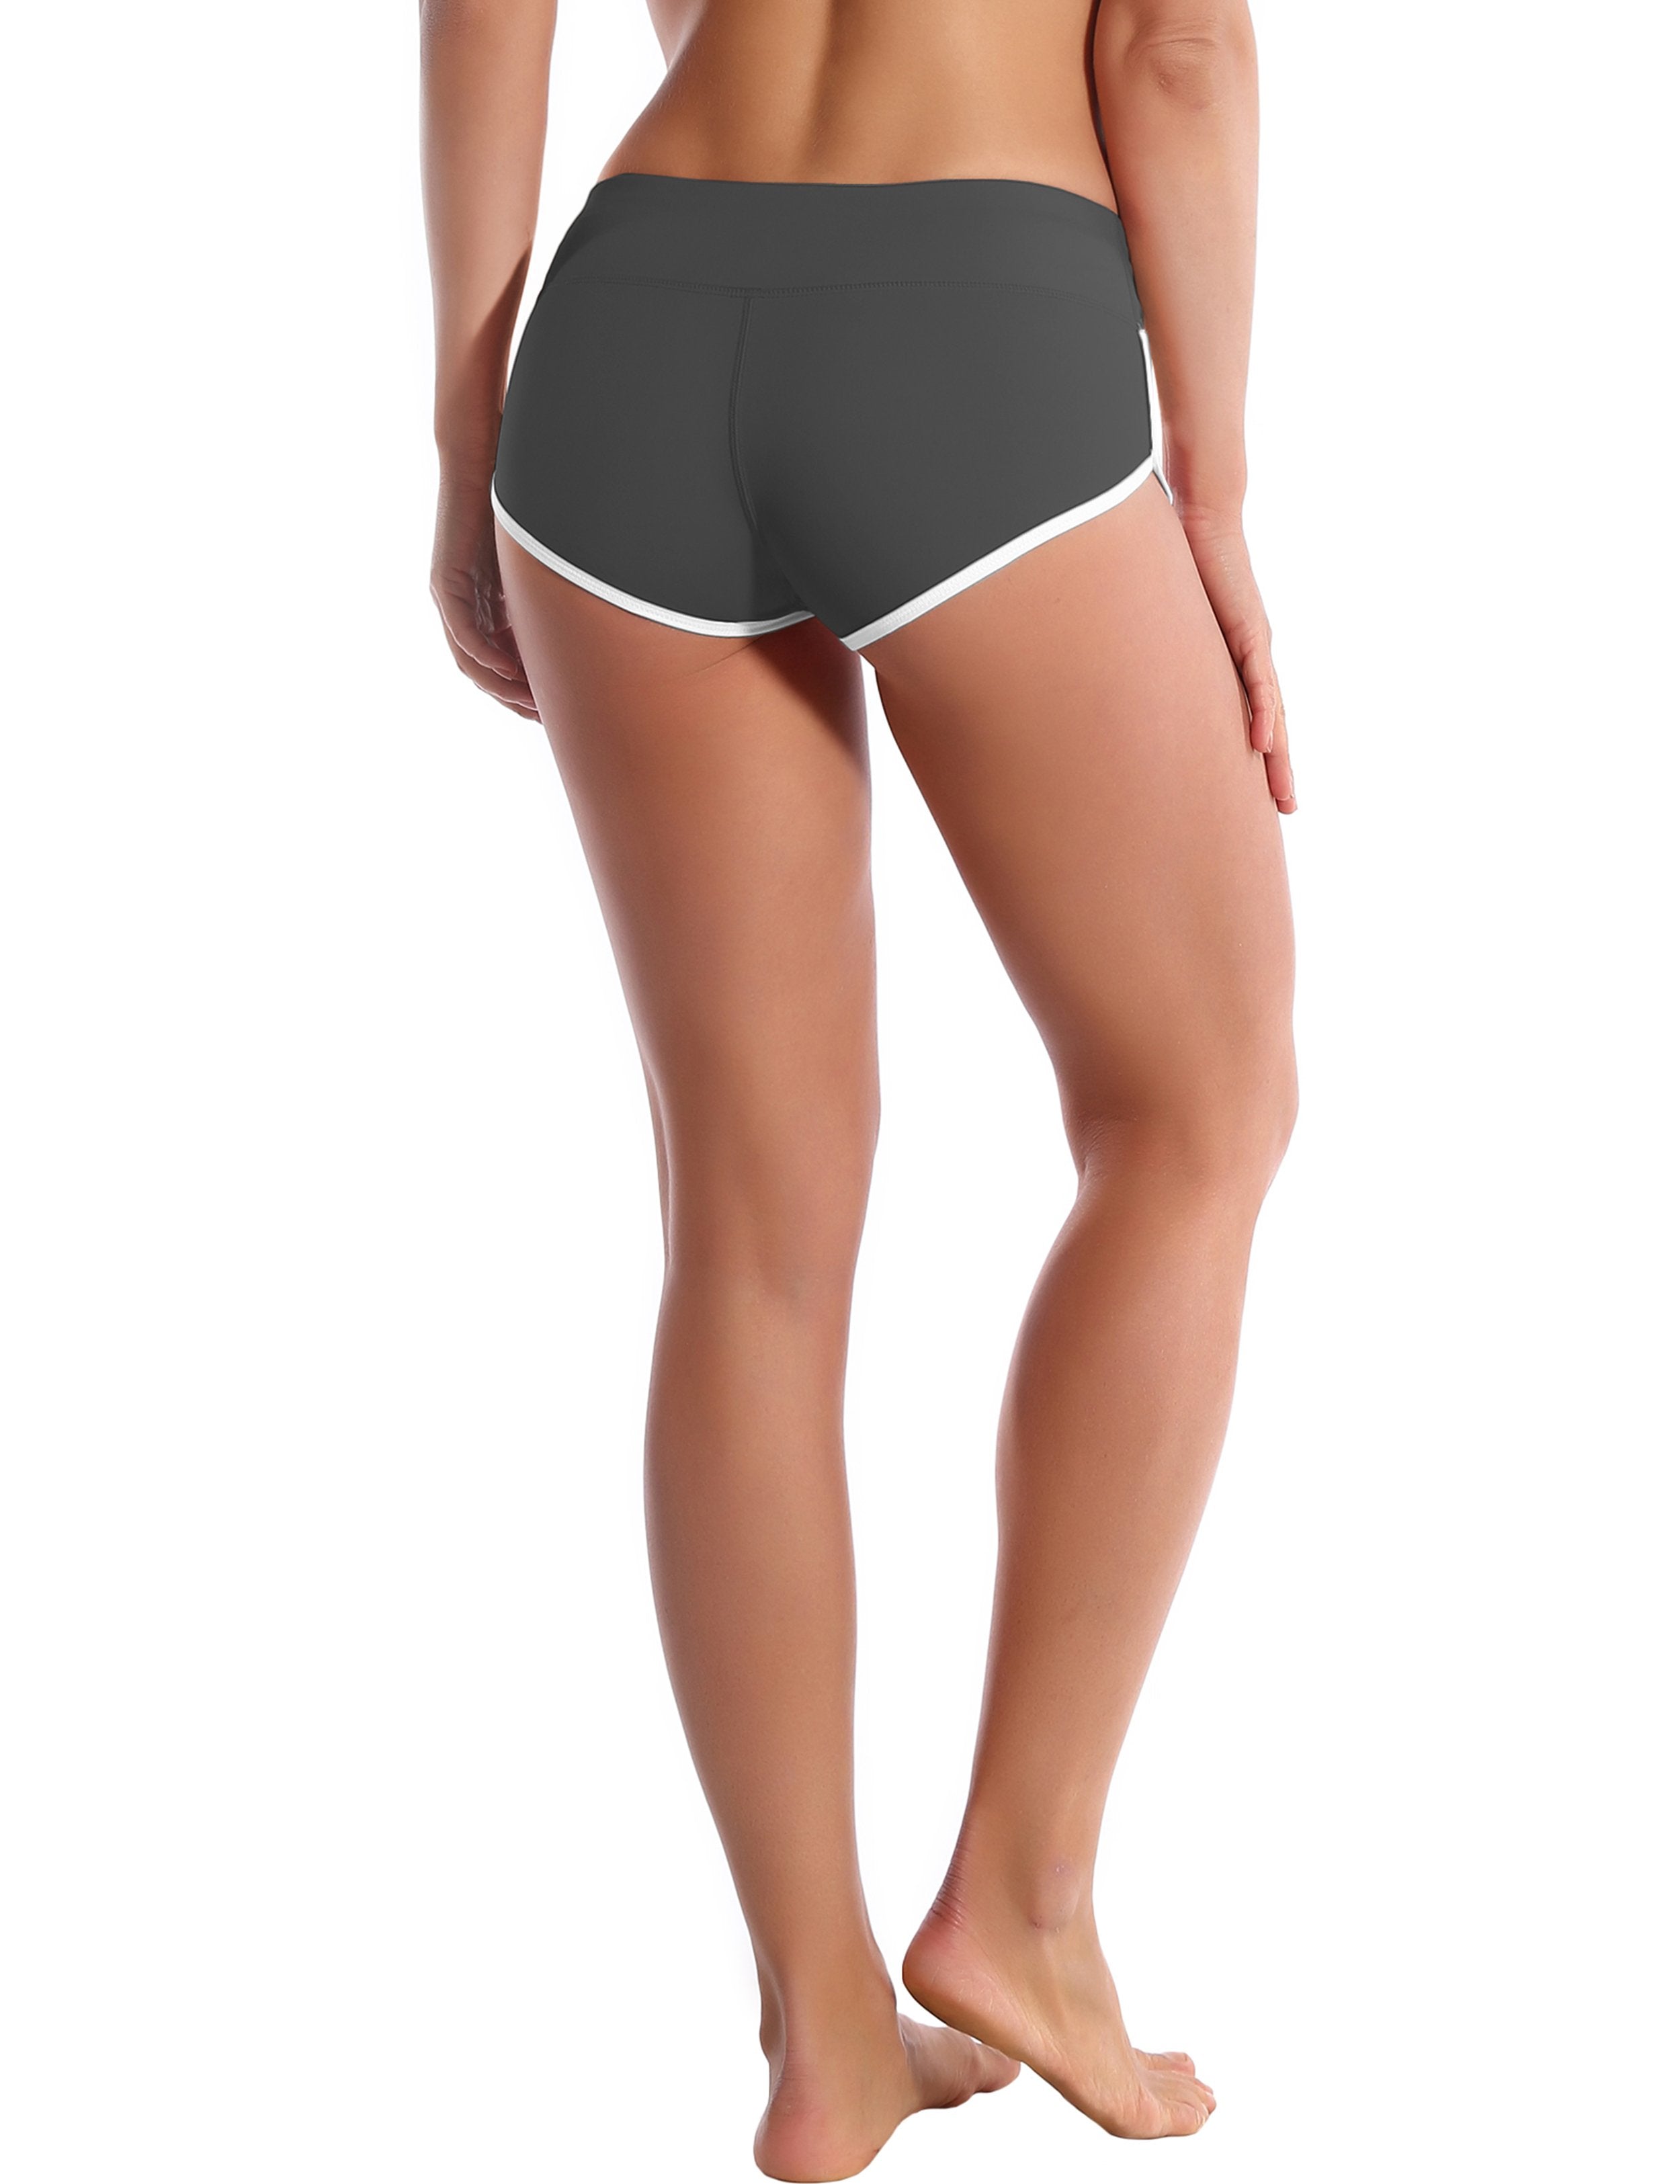 Sexy Booty Jogging Shorts shadowcharcoal Sleek, soft, smooth and totally comfortable: our newest sexy style is here. Softest-ever fabric High elasticity High density 4-way stretch Fabric doesn't attract lint easily No see-through Moisture-wicking Machine wash 75%Nylon/25%Spandex